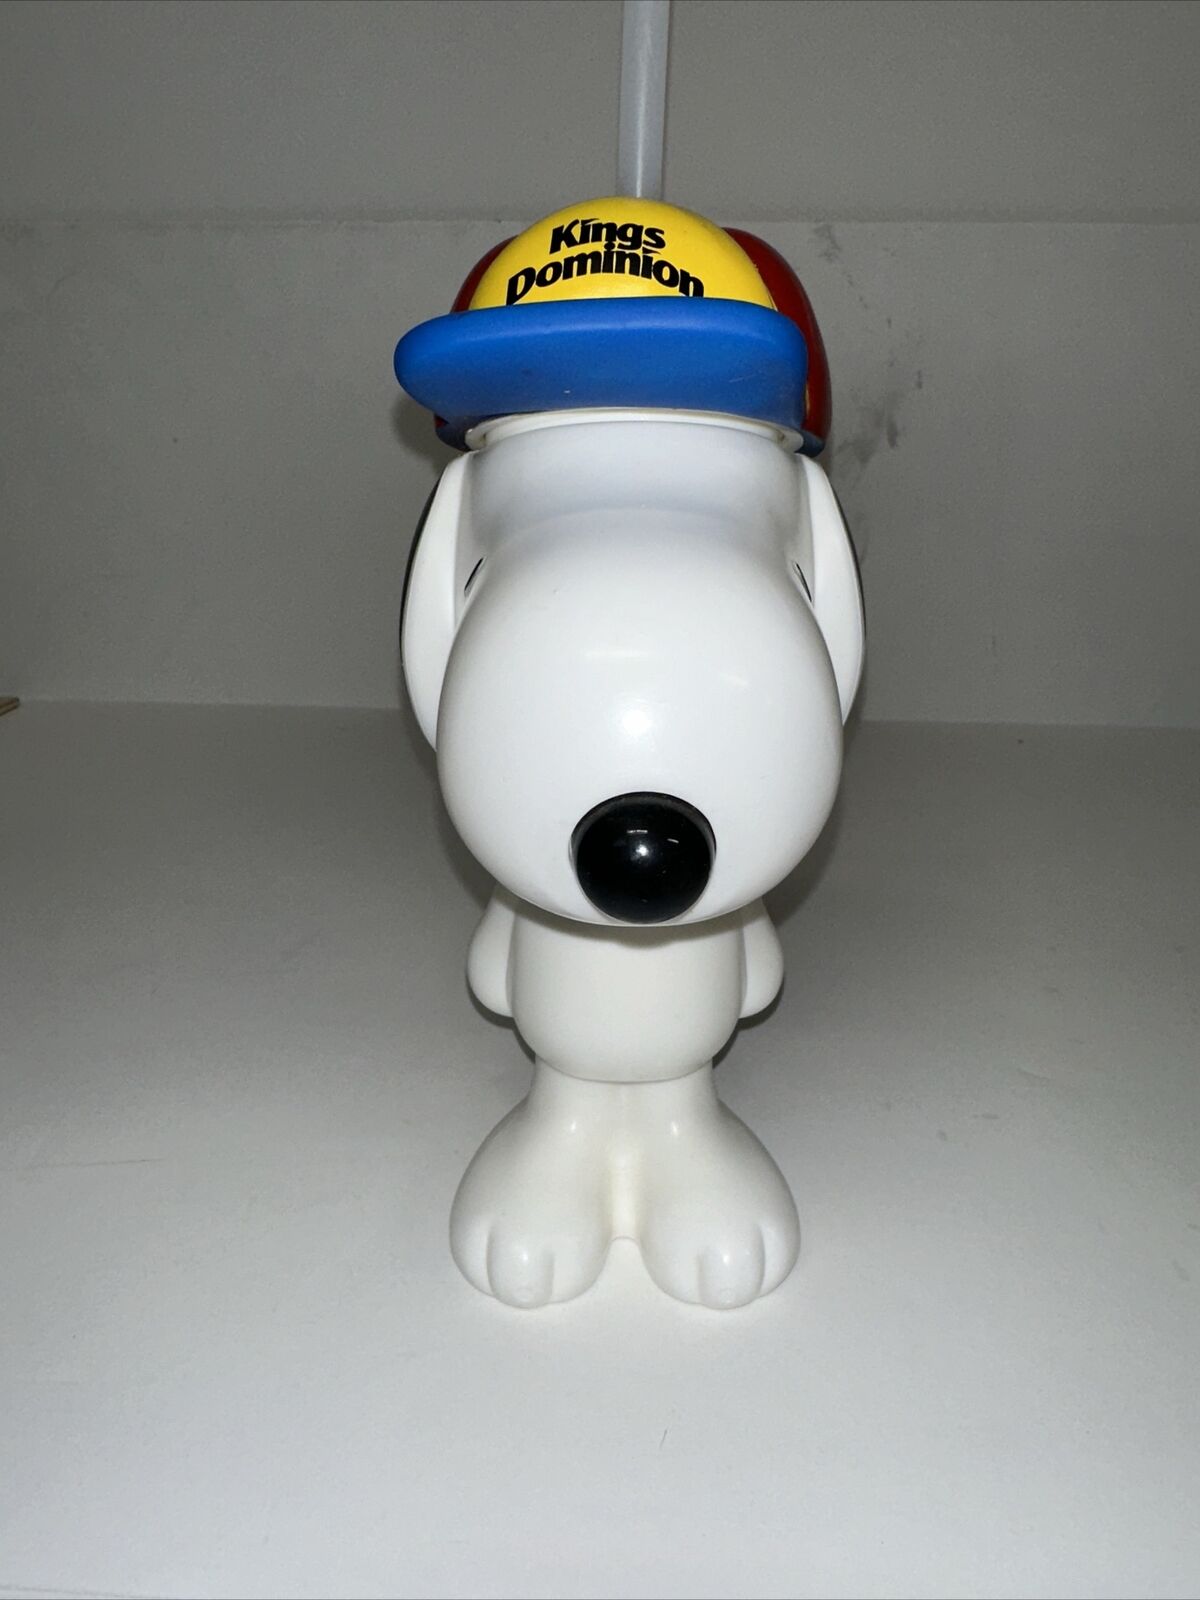 Kings Dominion Peanuts Snoopy Plastic Cup Snoopy 2010 Rare